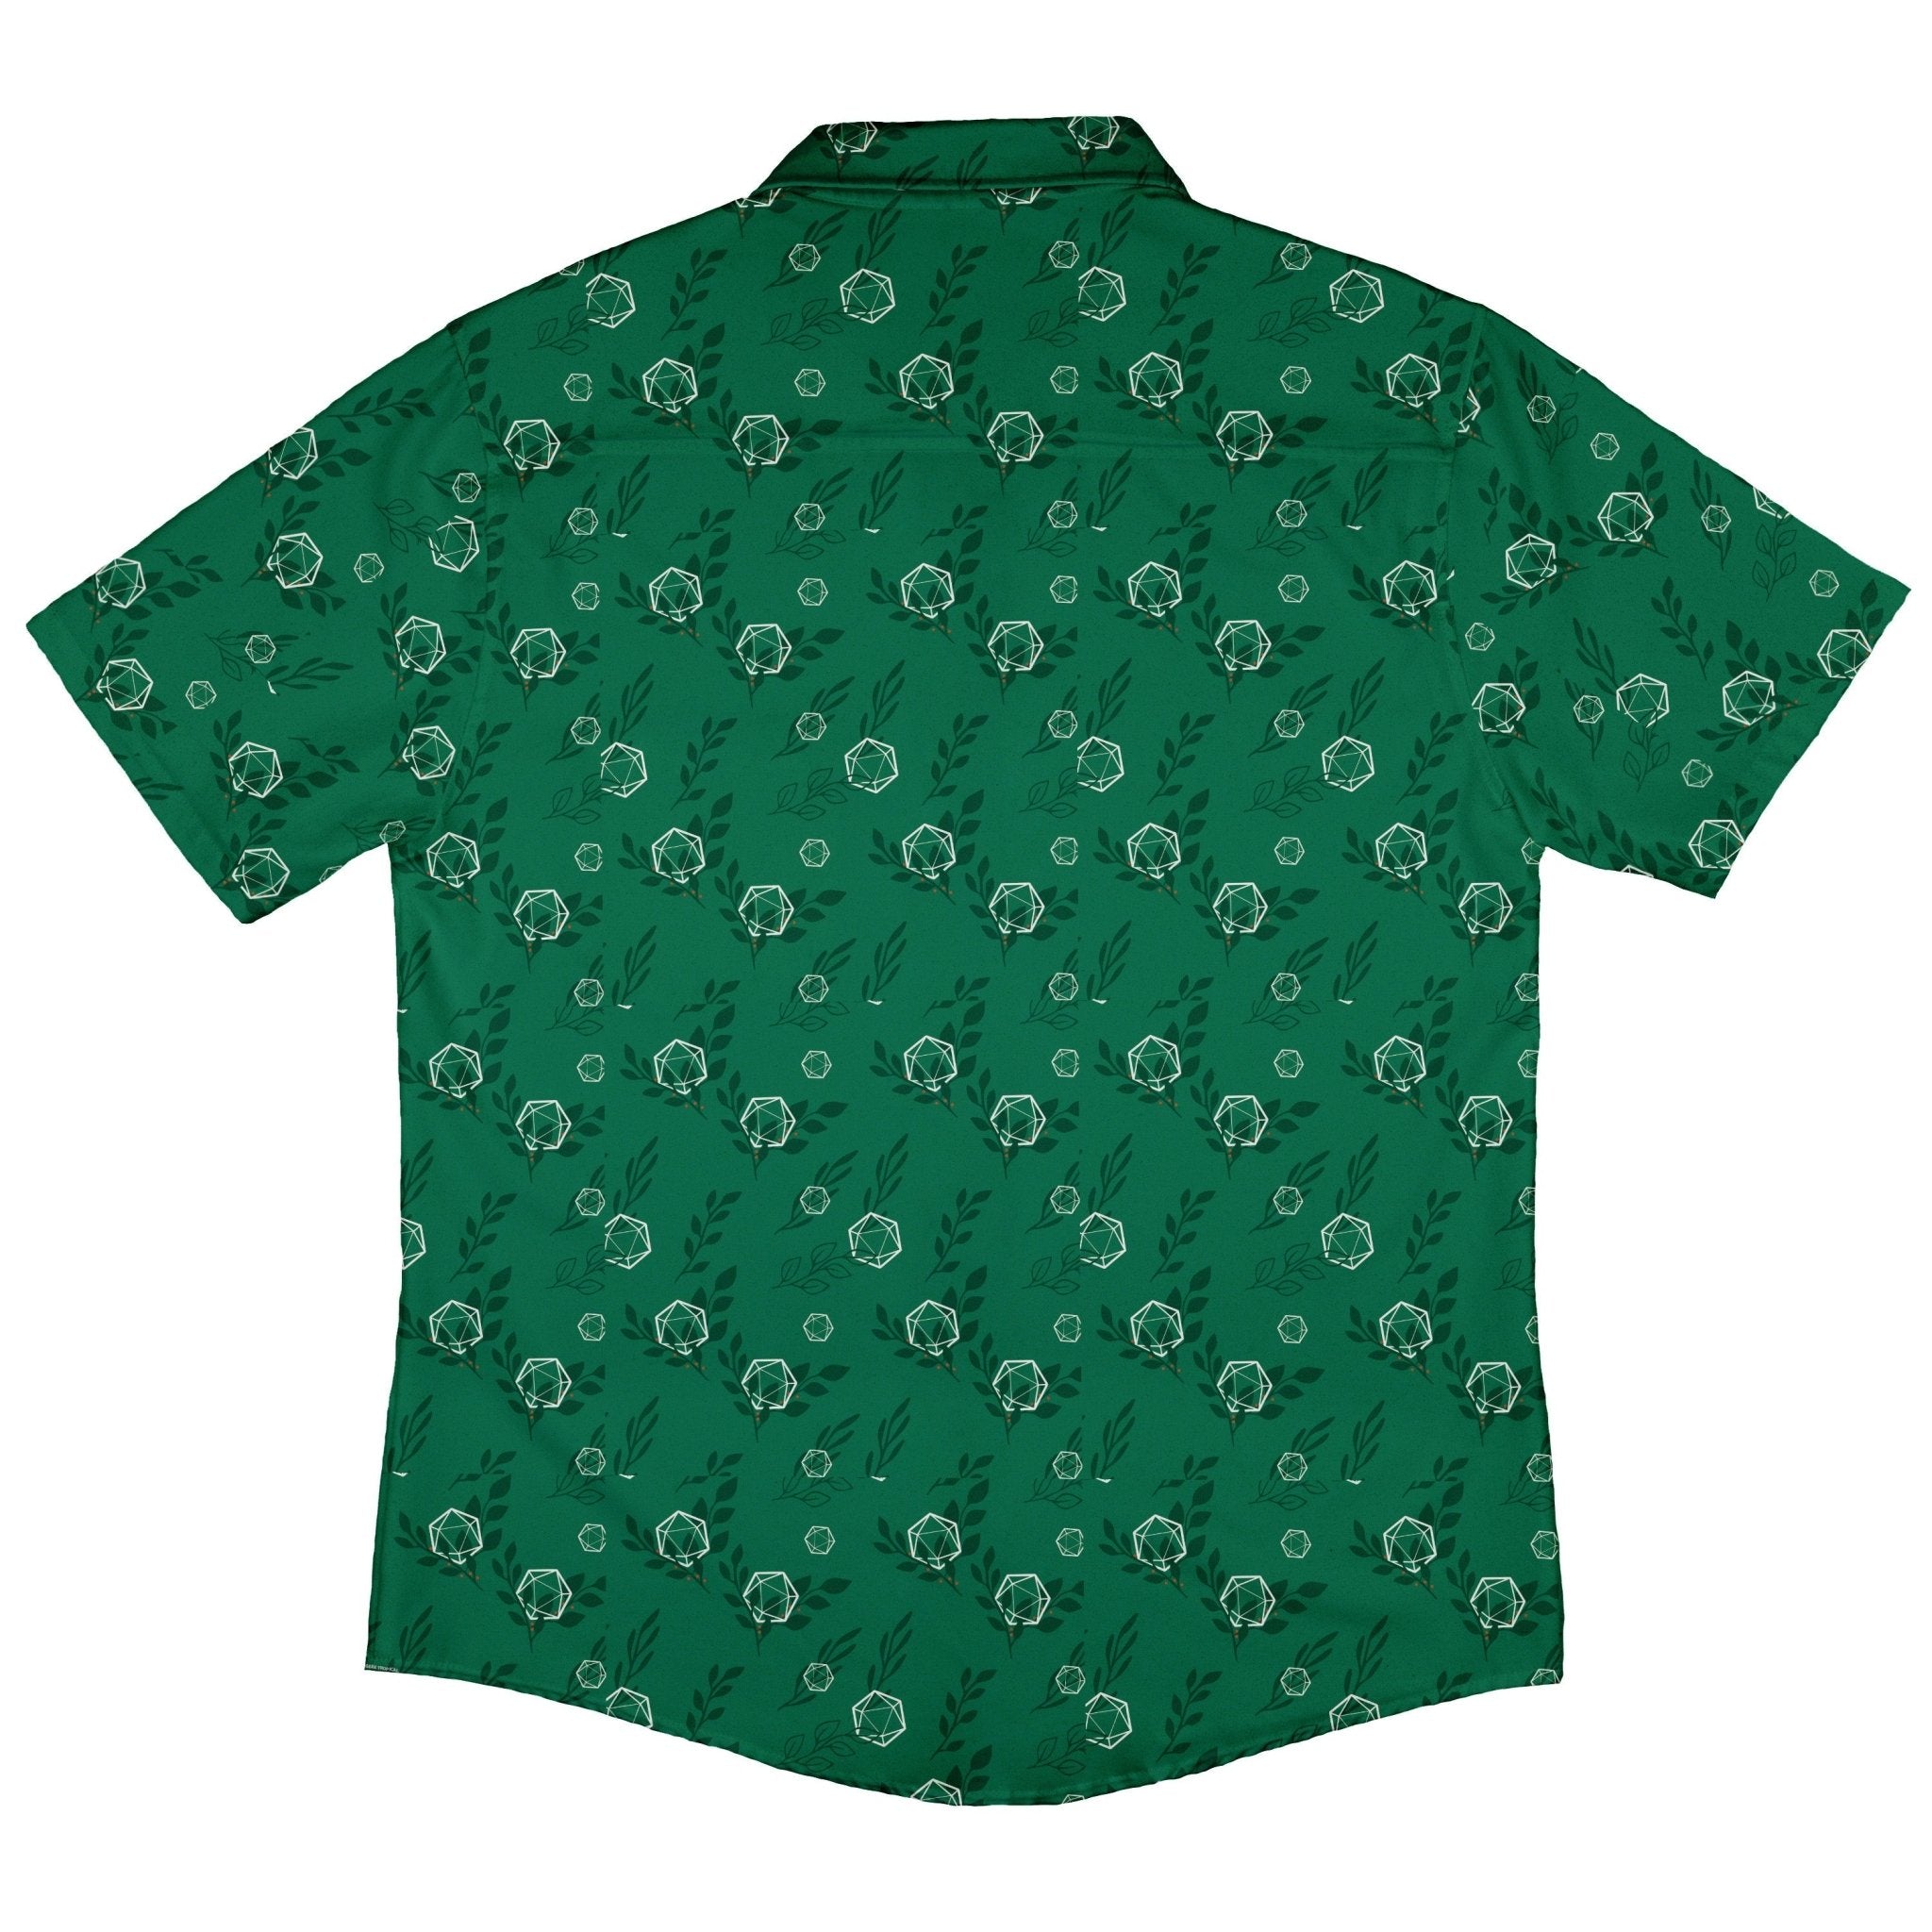 Leafy Green Dice Button Up Shirt - adult sizing - Botany Print - Design by Heather Davenport